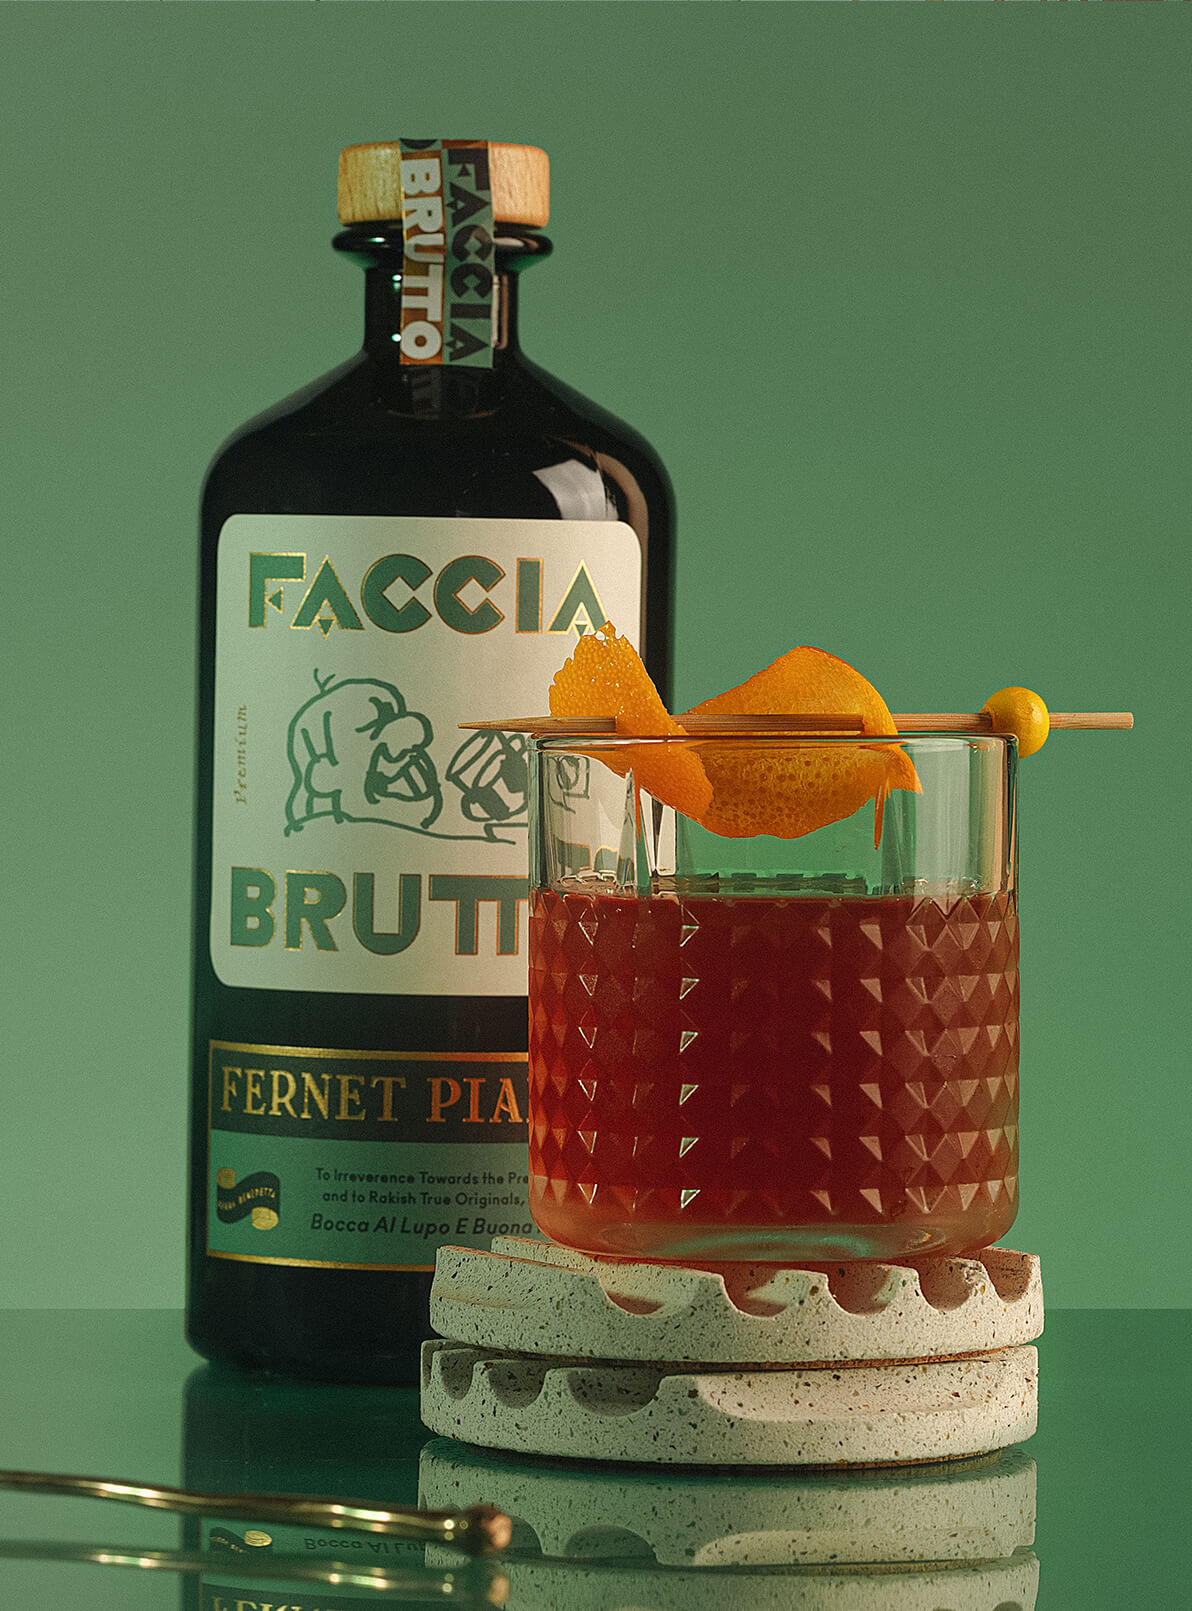 Cocktail with orange peel on coaster with Faccia Brutto Fernet Pianta bottle in the background 